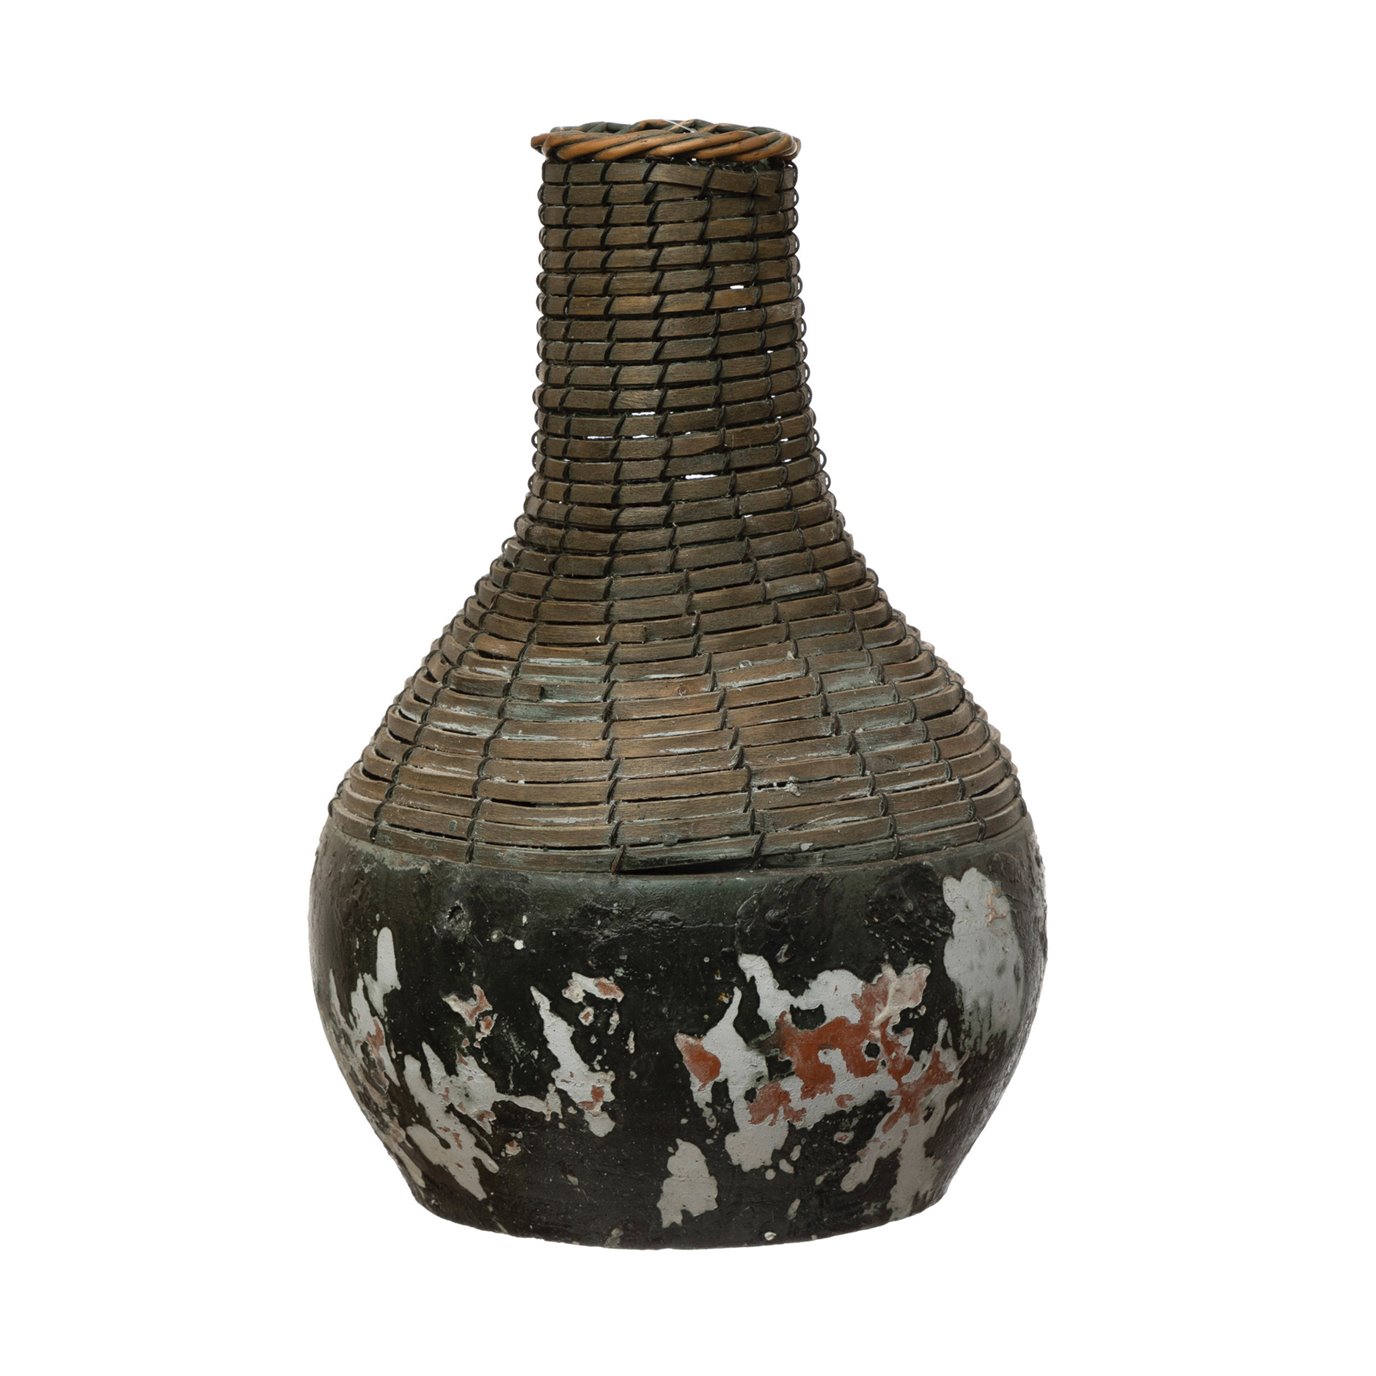 Hand-Woven Rattan & Clay Vase, Distressed Black (Each One Will Vary)